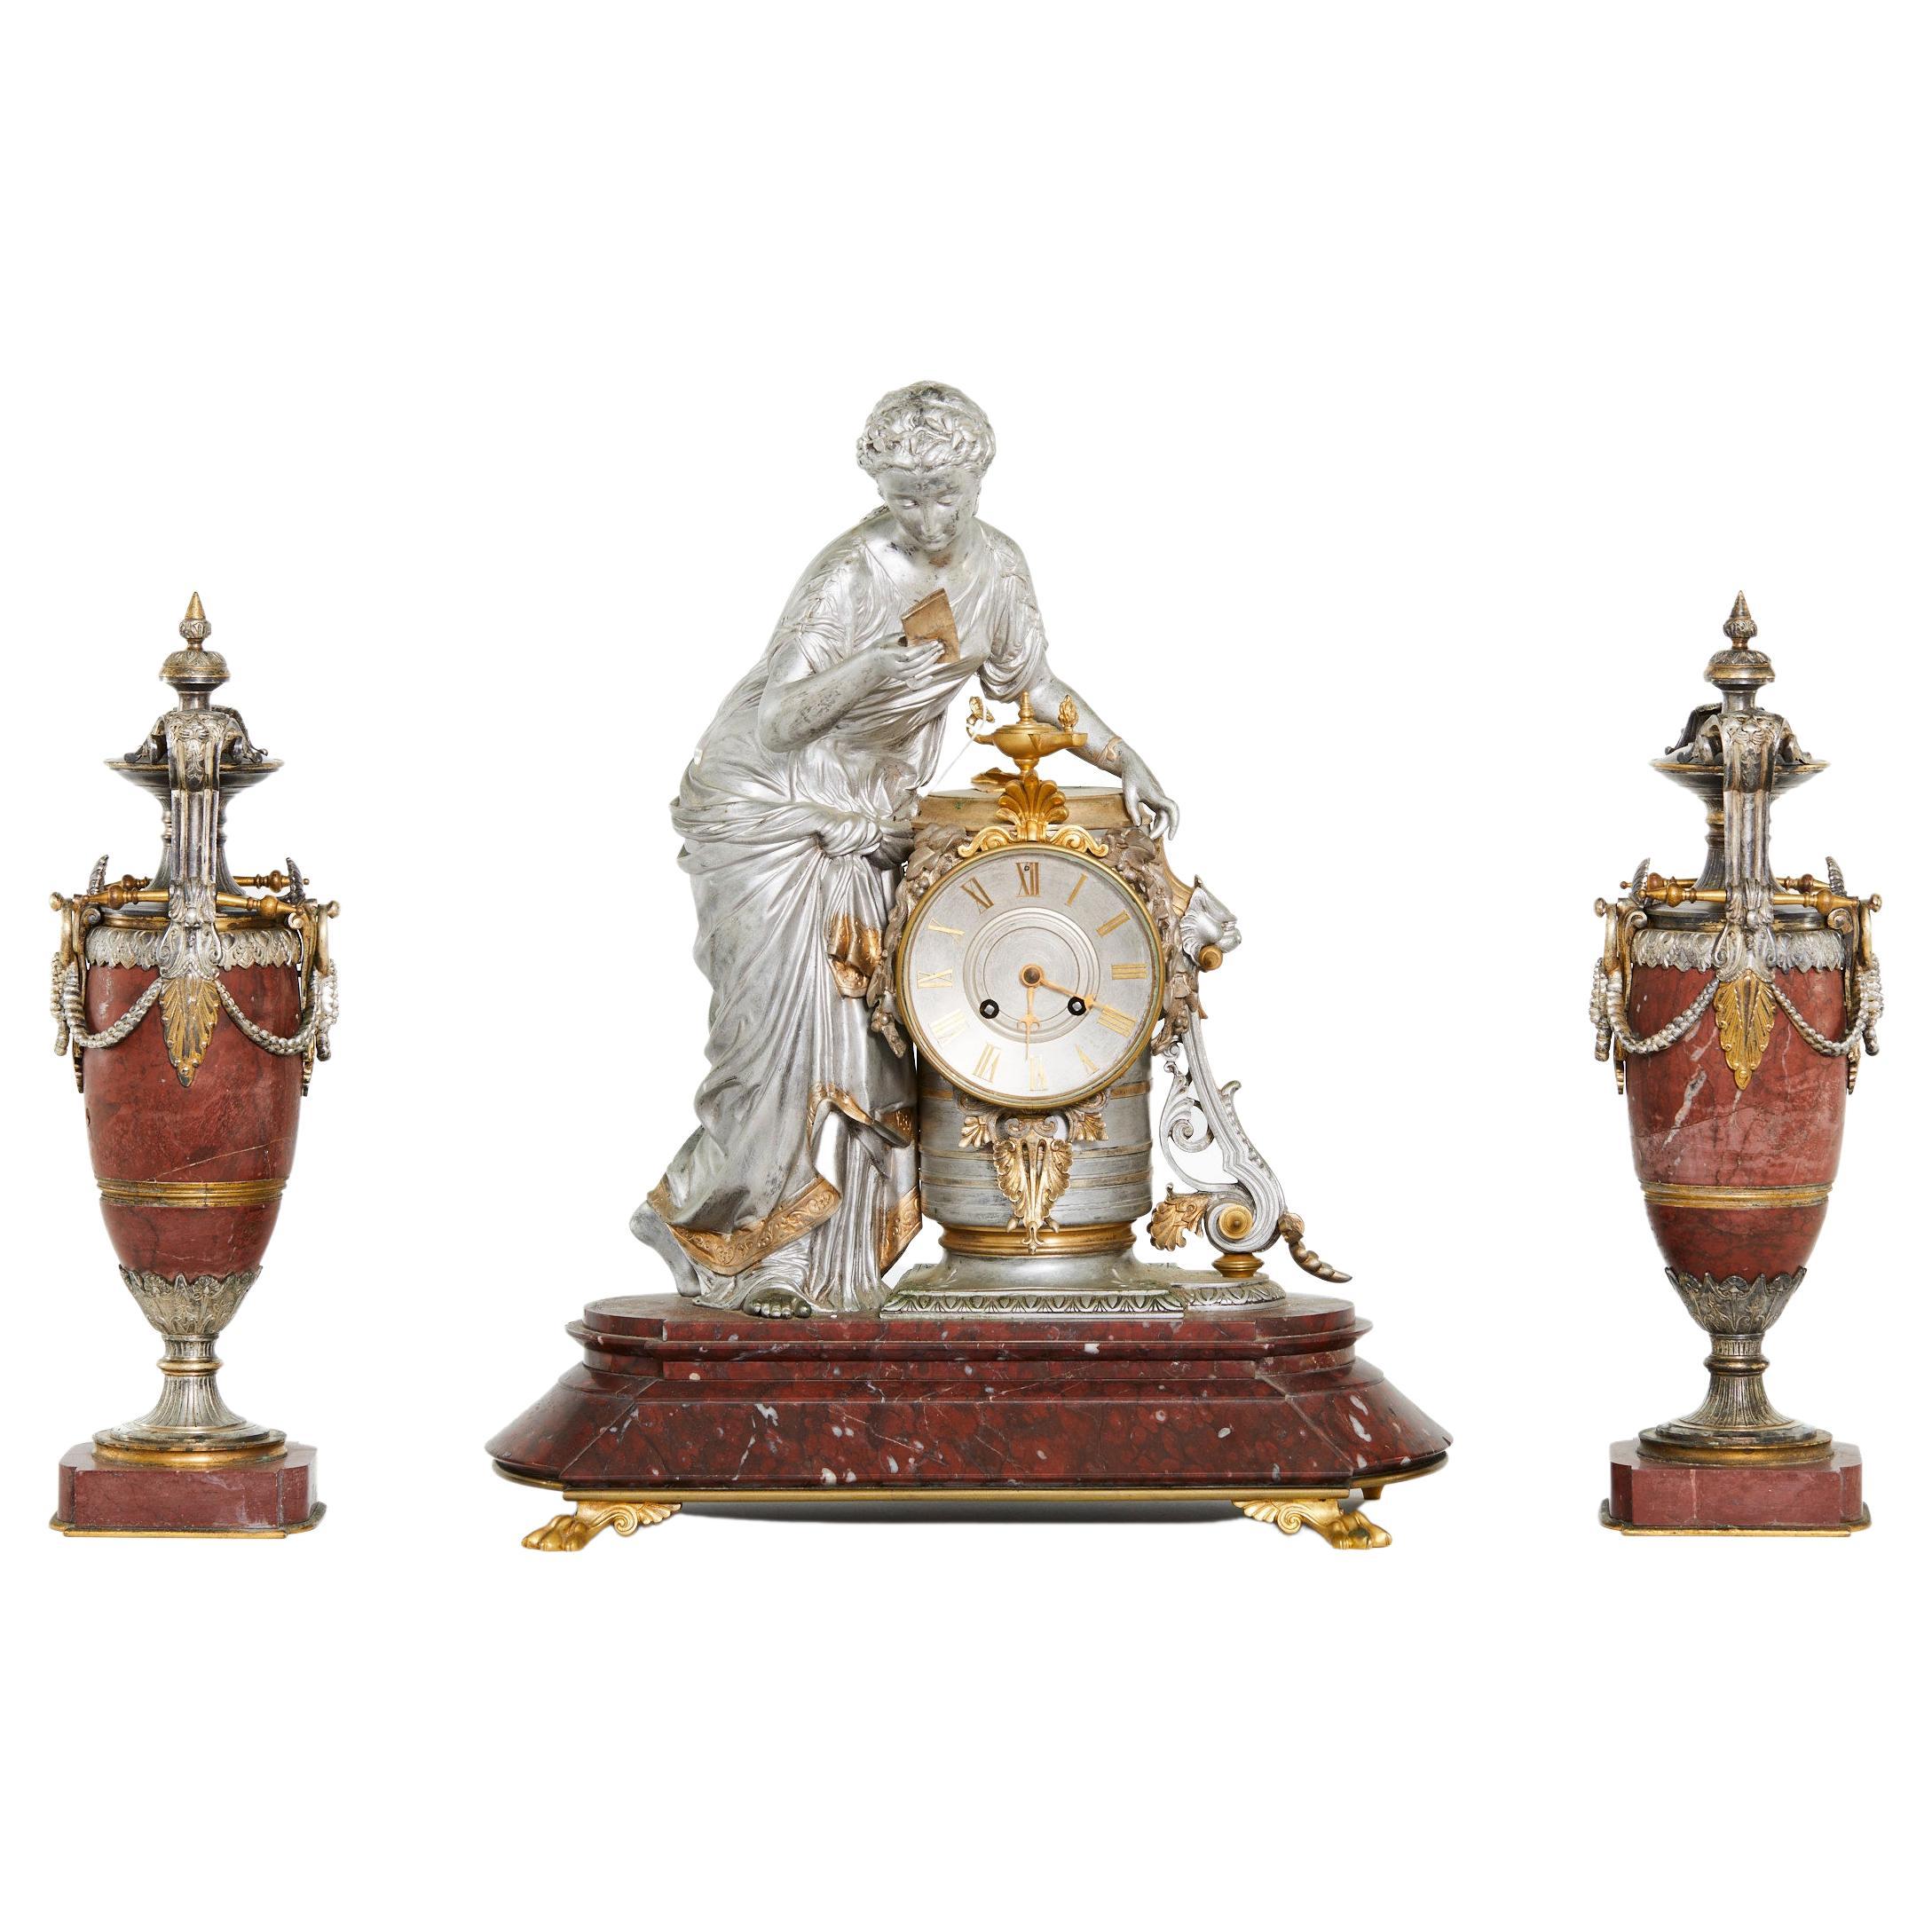 Mid 19th Century French silvered bronze and rouge marble three piece decorative clock garniture set . The clock features a classical figured woman with draping garments and flanked by two matching urns . Eight day brass / porcelain face time and